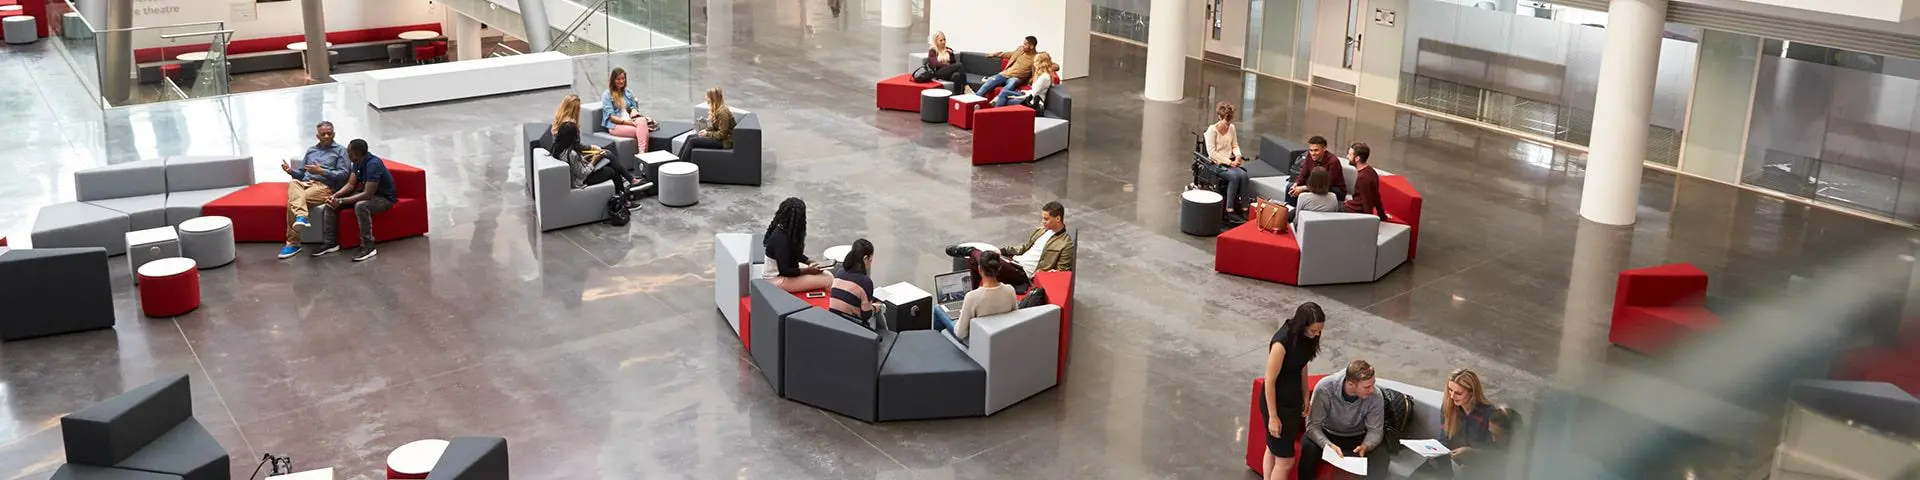 Students in the Atrium of the Spark